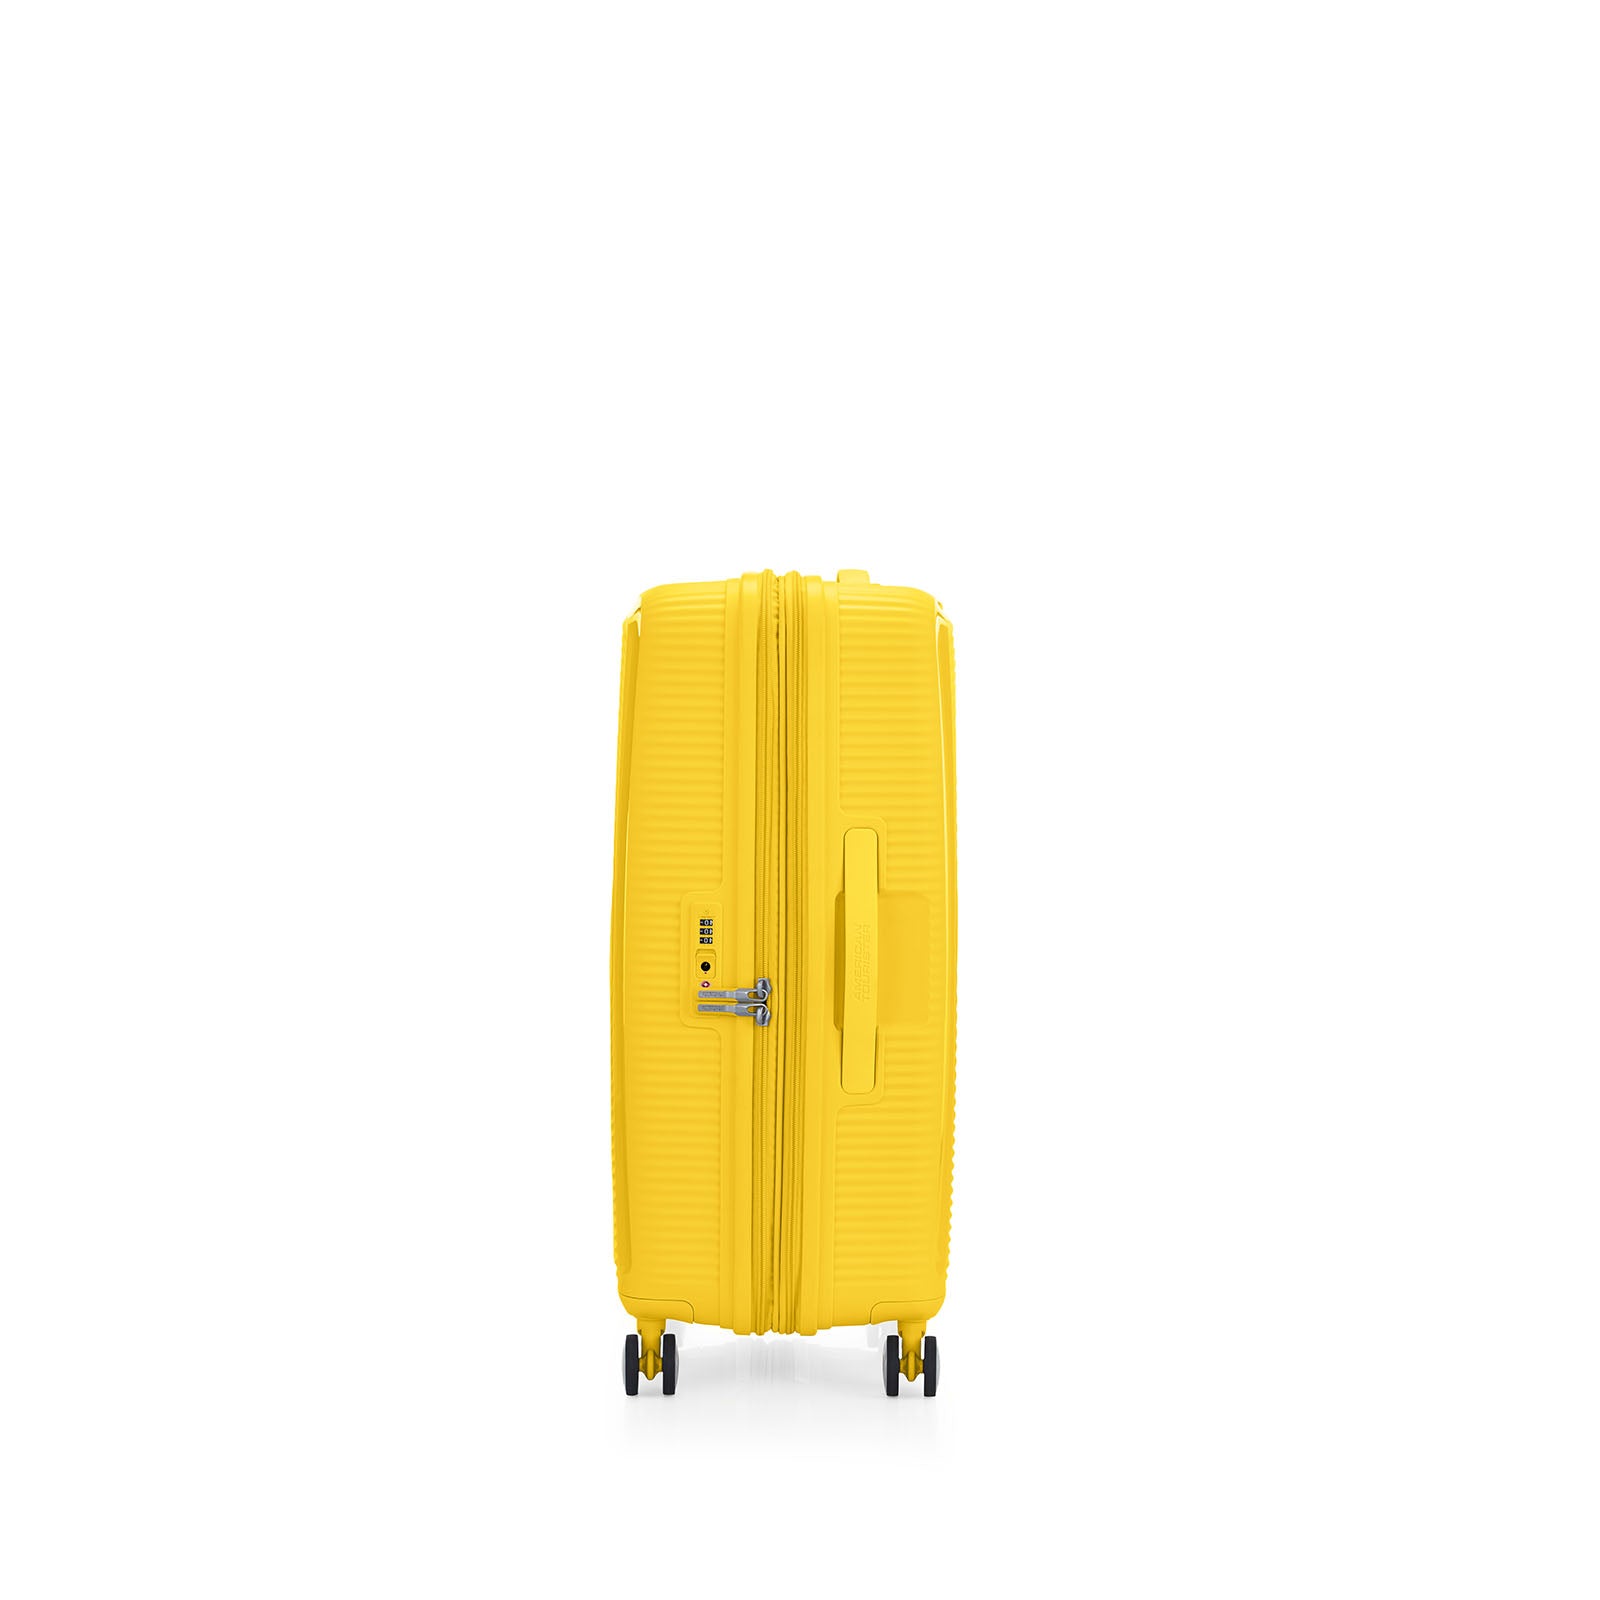 American-Tourister-Curio-2-69cm-Suitcase-Golden-Yellow-Side